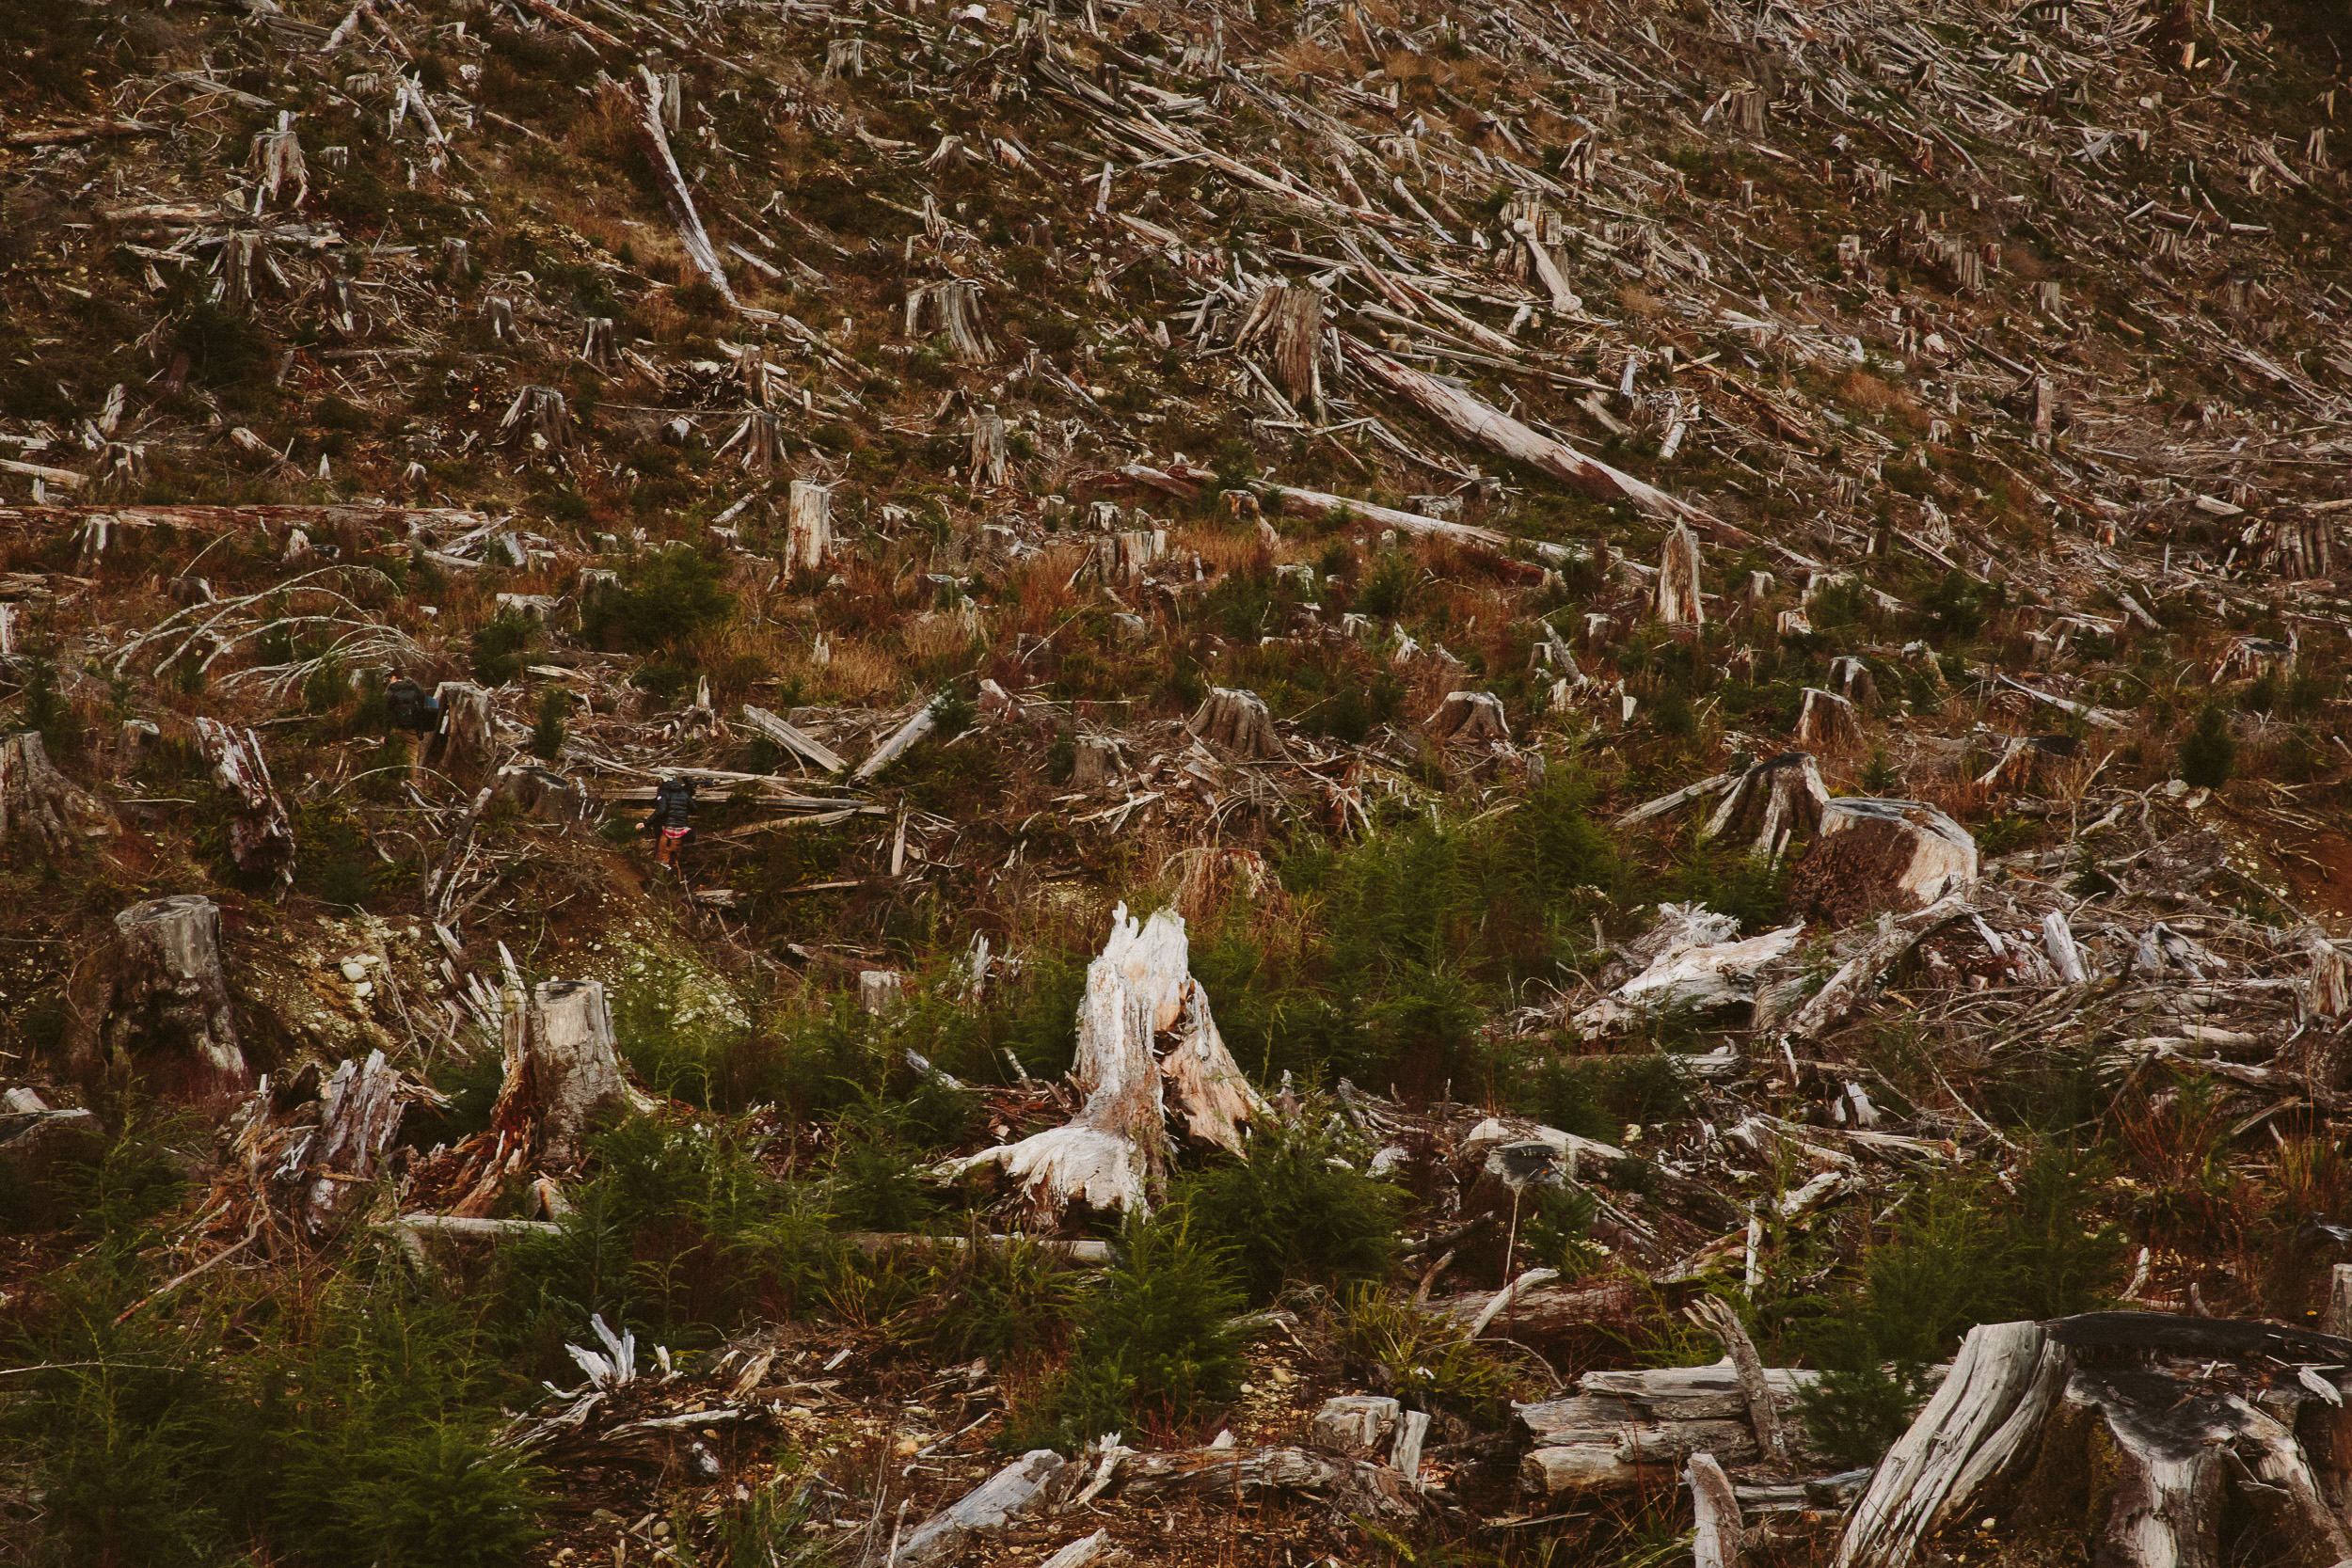 10-Vancouver-Island-Old-Growth-Forests-Logging-Port-Renfrew-Big-Lonely-Doug-Clearcut.jpg